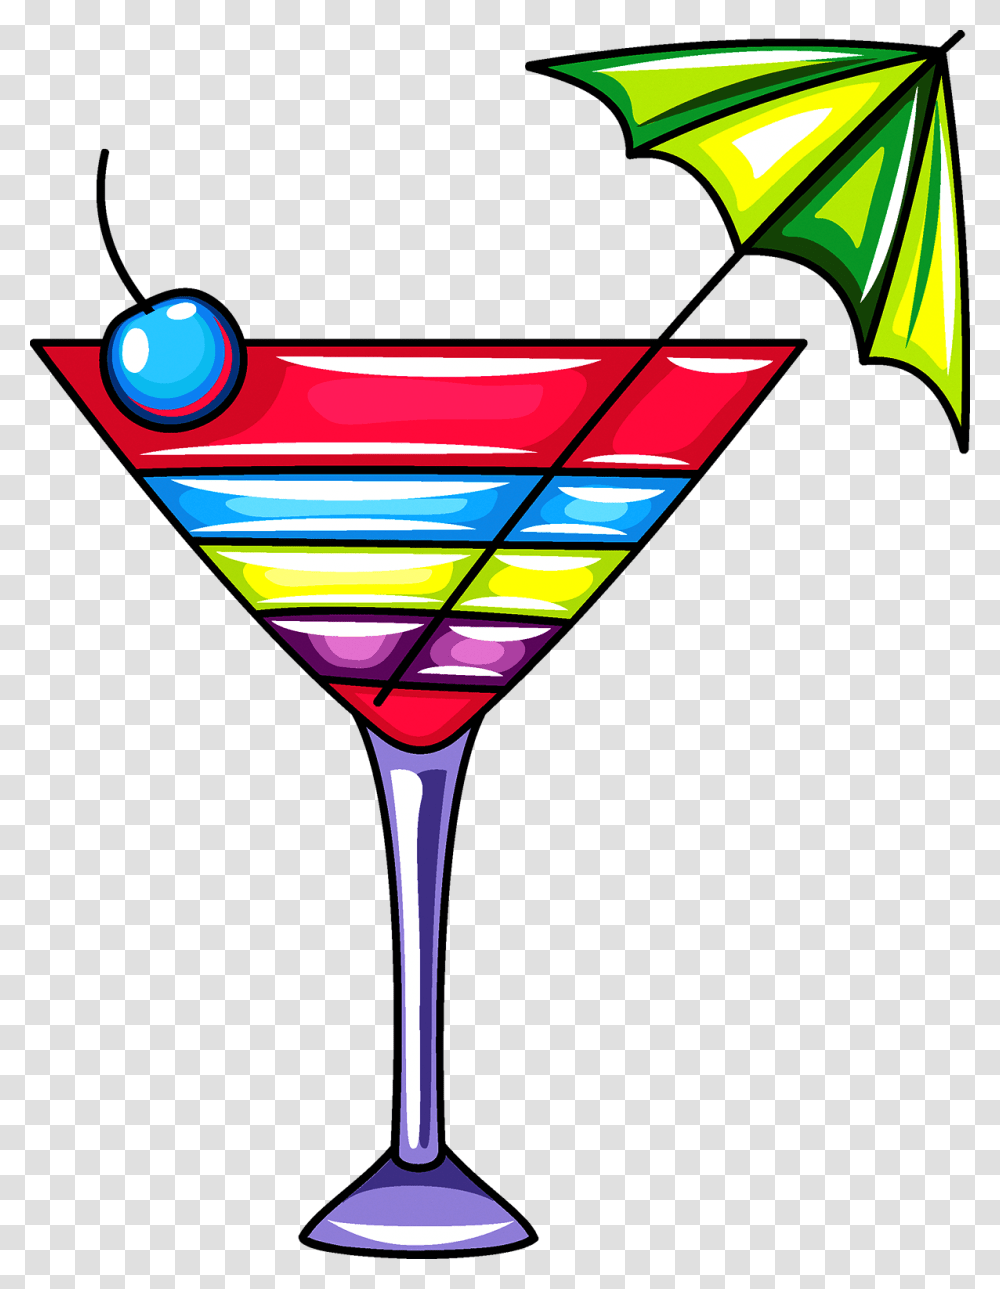 Cocktail Soft Drink Lady Lady Wine Cup, Alcohol, Beverage, Martini, Glass Transparent Png